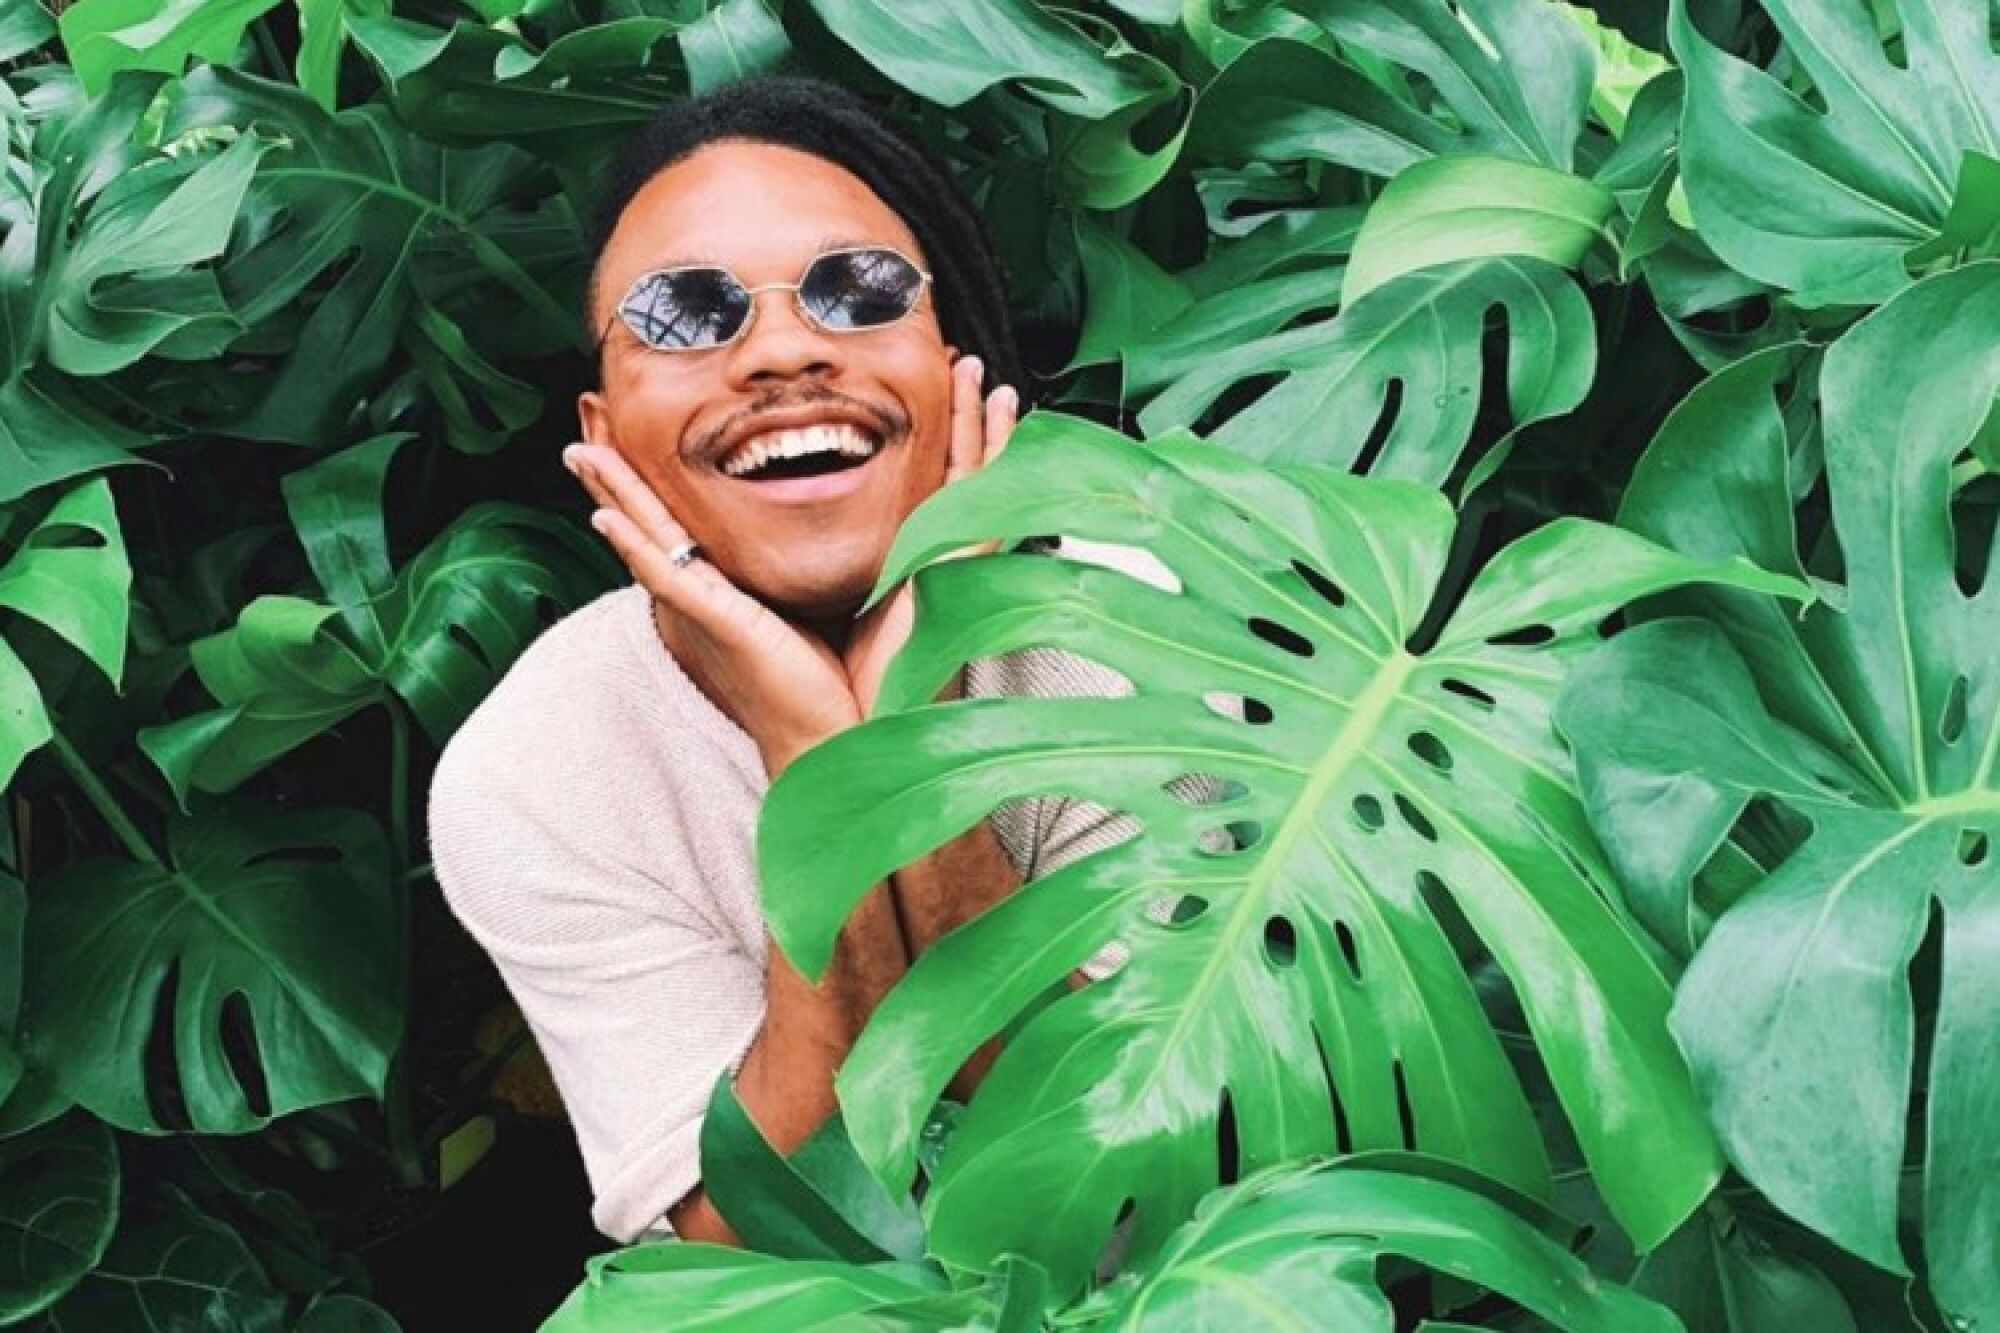 A smiling person wearing sunglasses and surrounded by monstera plant leaves.